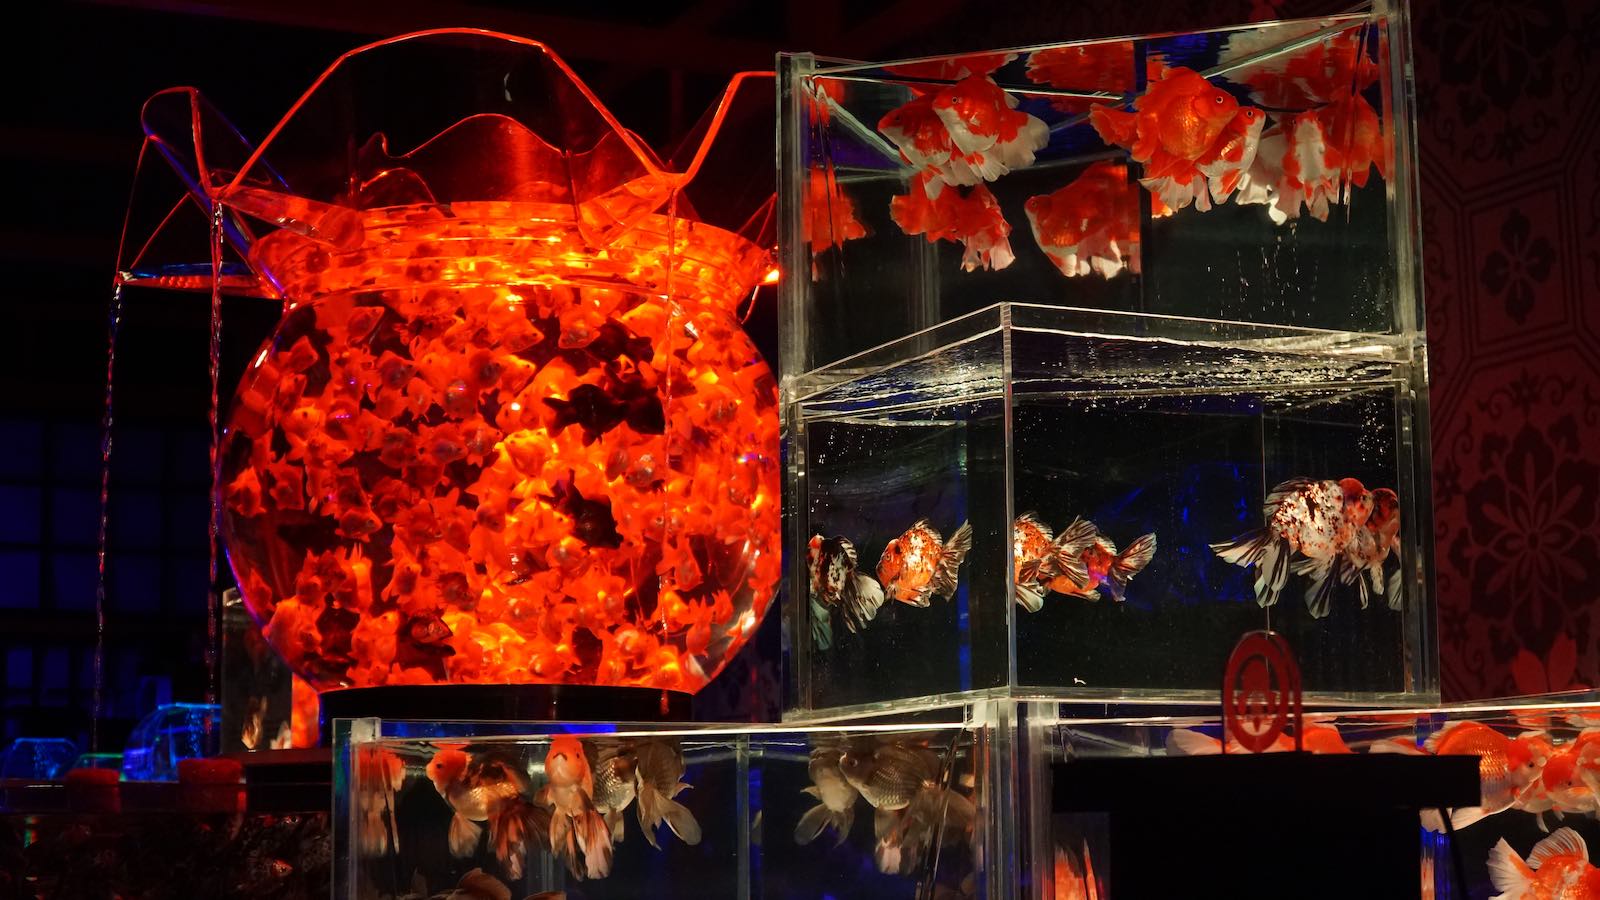 Somebody I met in Shanghai told me about an eccentric goldfish exhibit on the top floor of one of the highest buildings in Shanghai. Of course I went to check it out. It was definitely eccentric, imagine a fancy nightclub full of tanks of weirdly bred goldfish.